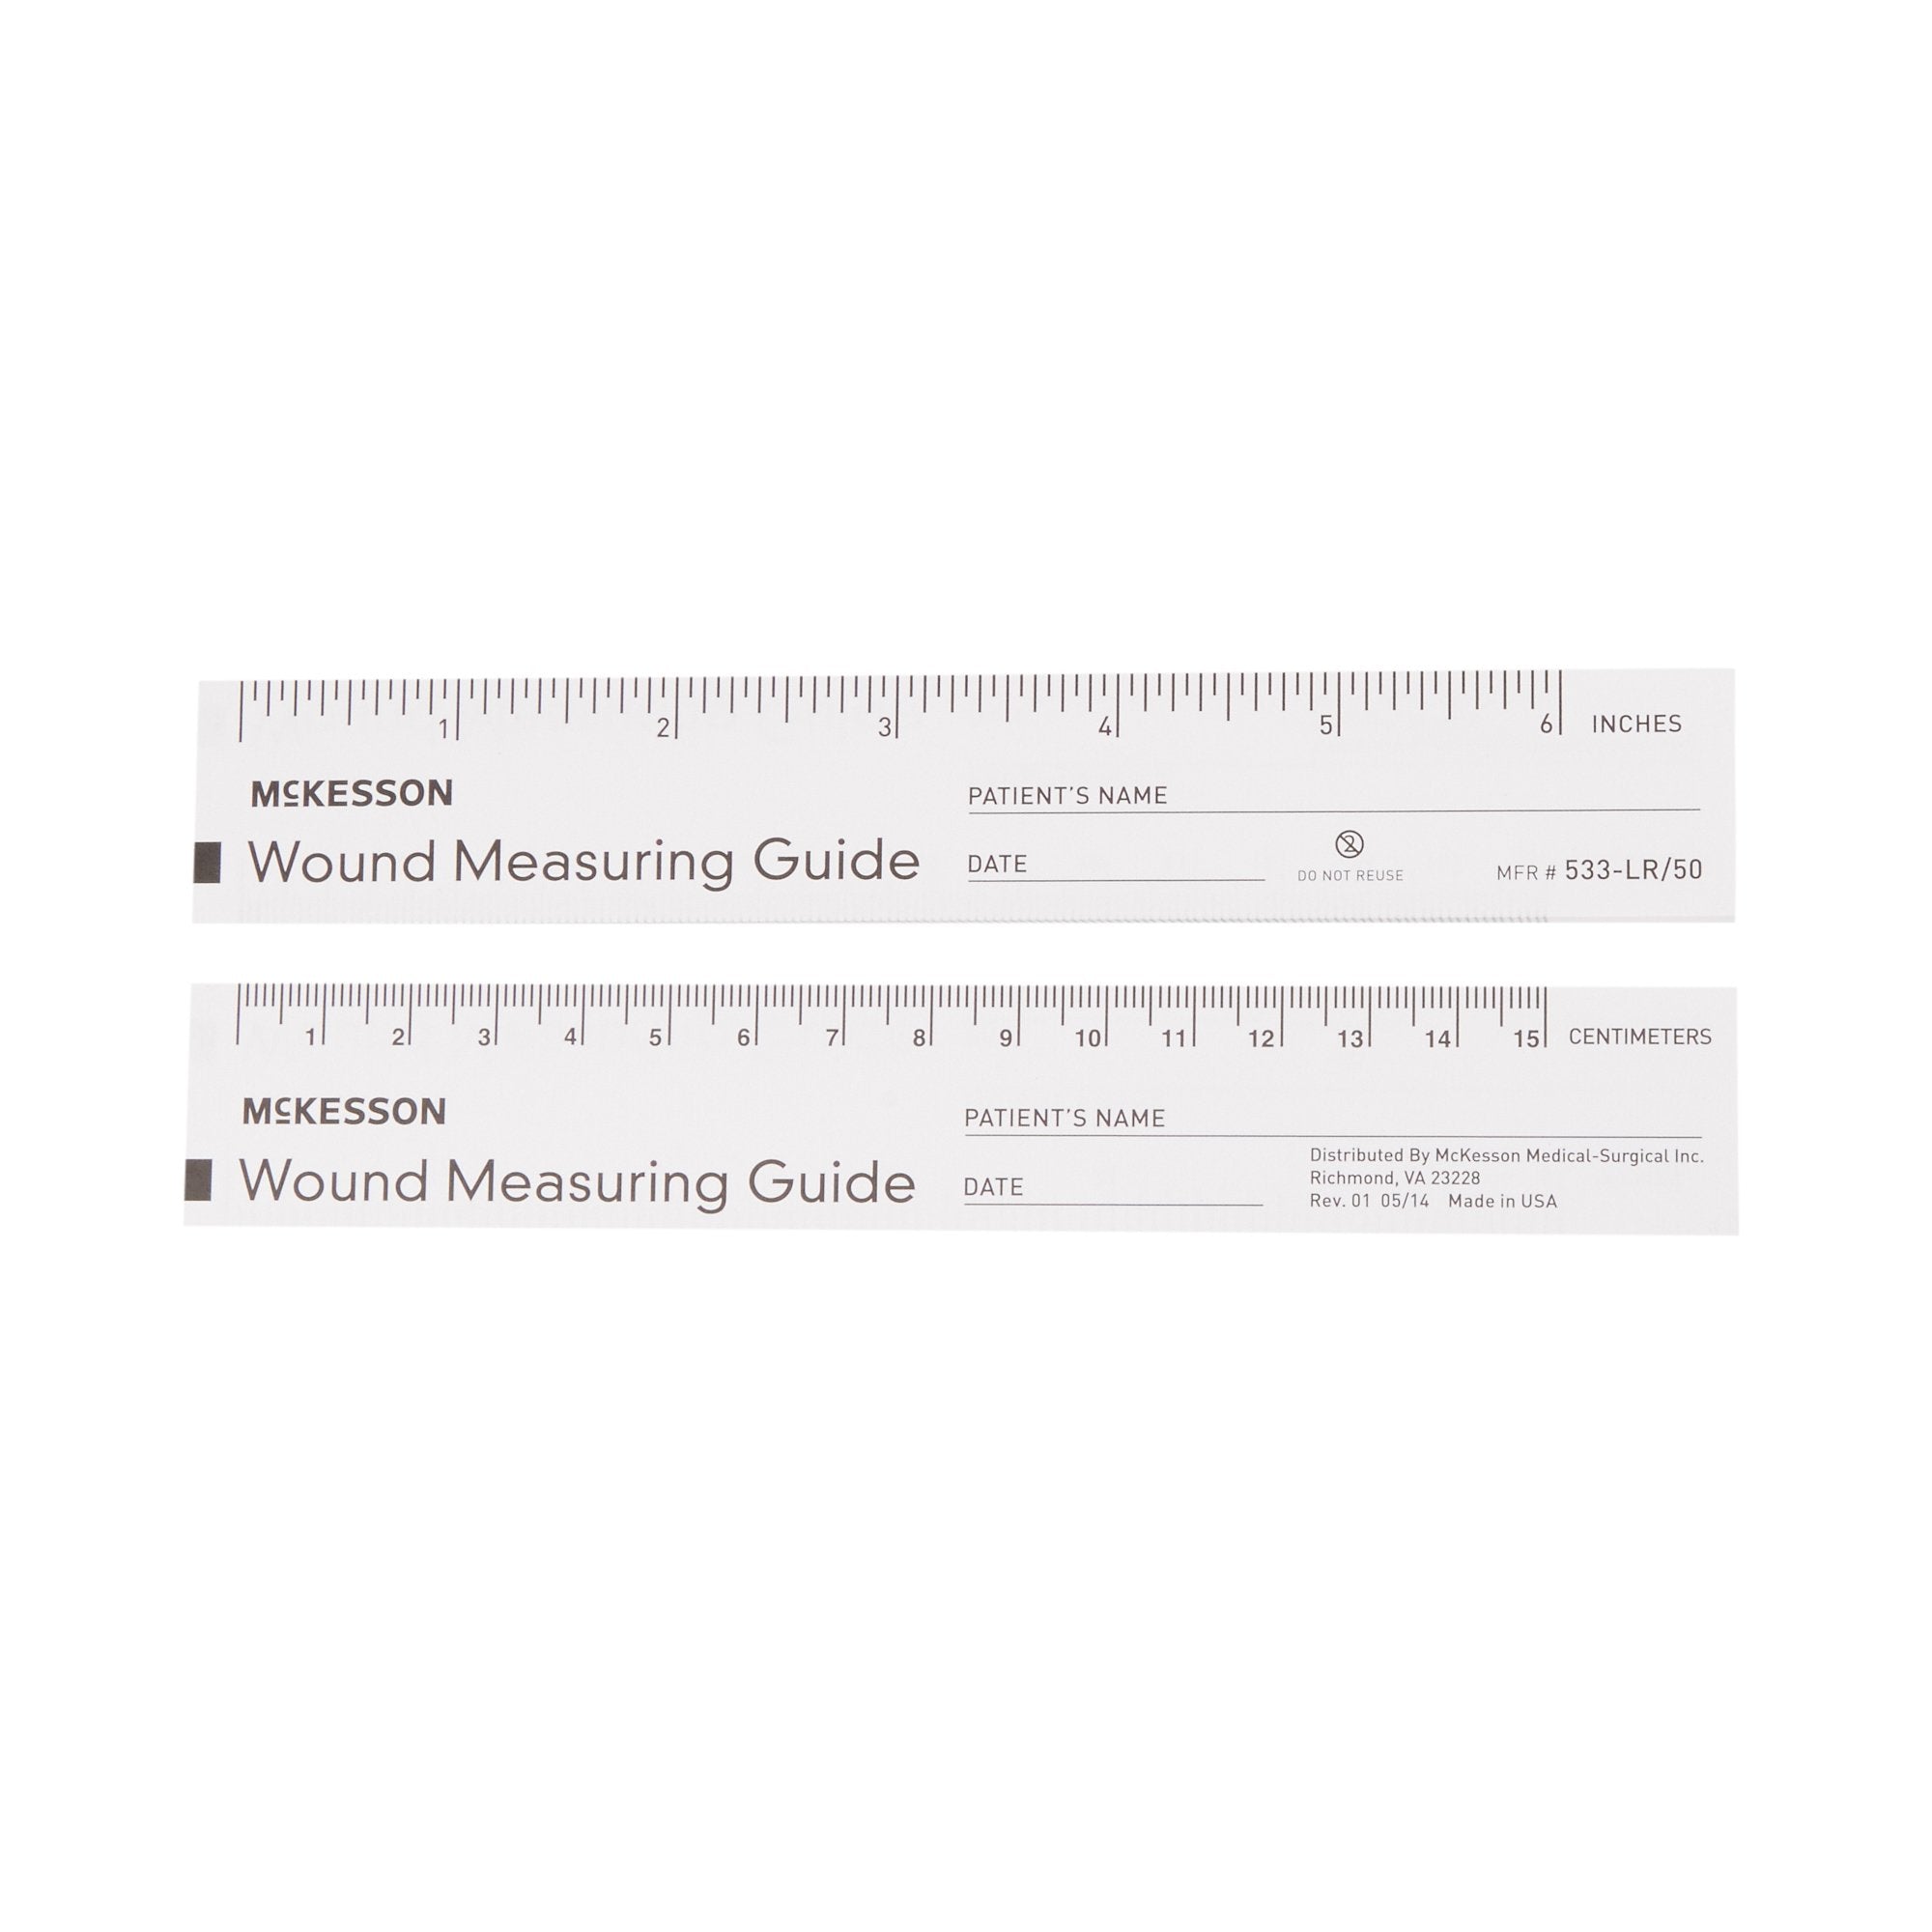 Wound Measuring Guide McKesson Metric / English Paper 6 Inch